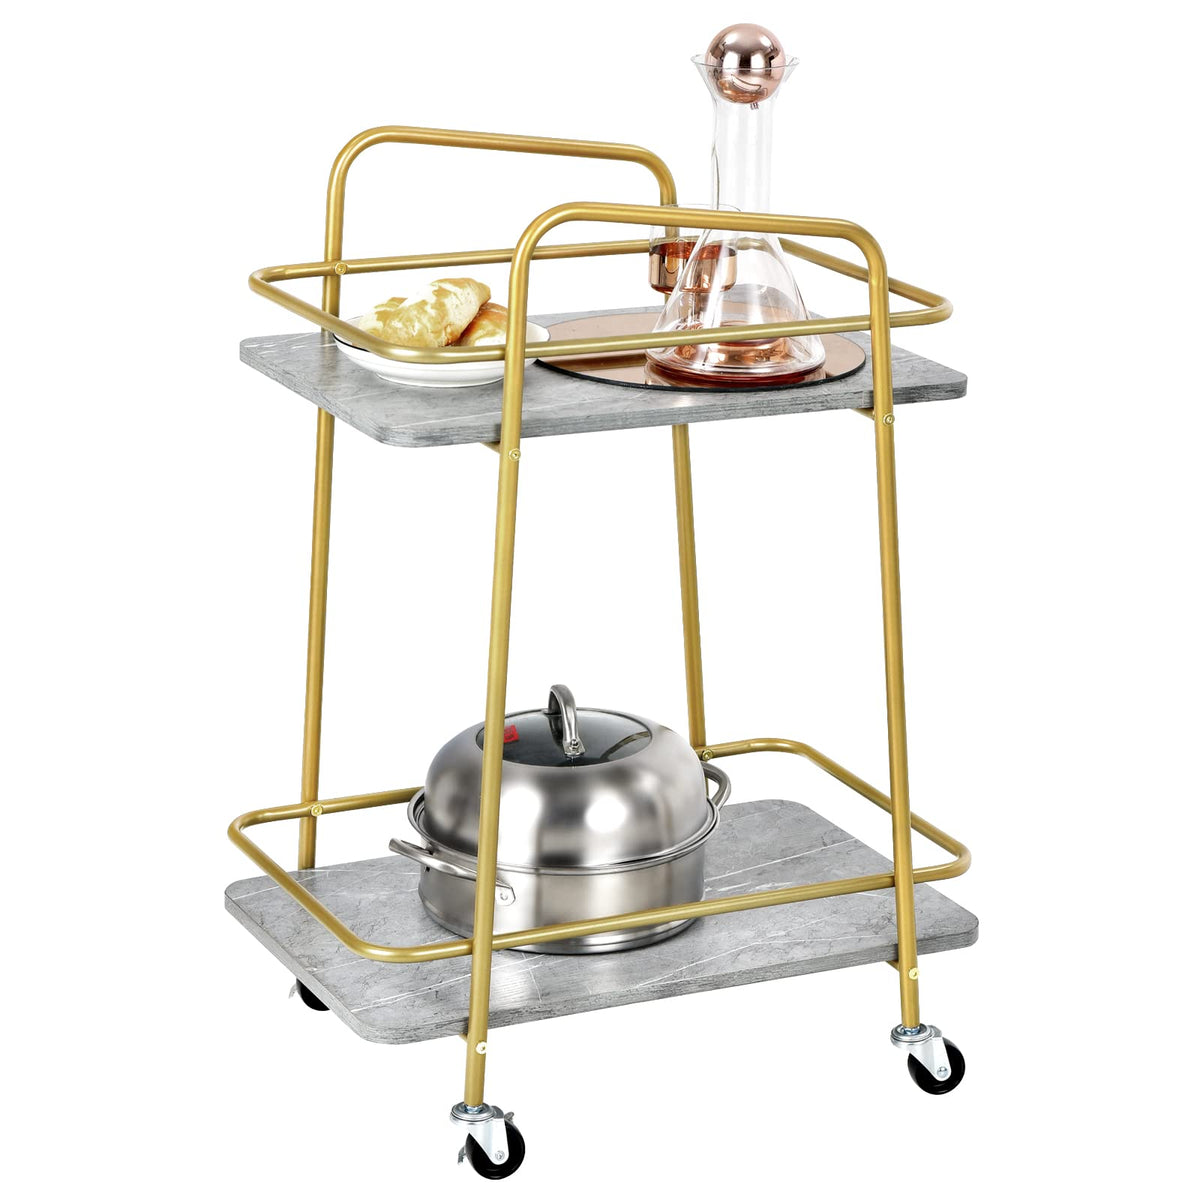 Giantex 2-Tier Kitchen Rolling Cart, Wooden Trolley w/Guardrail, Marble Top & Lockable Casters, Mobile Serving Cart